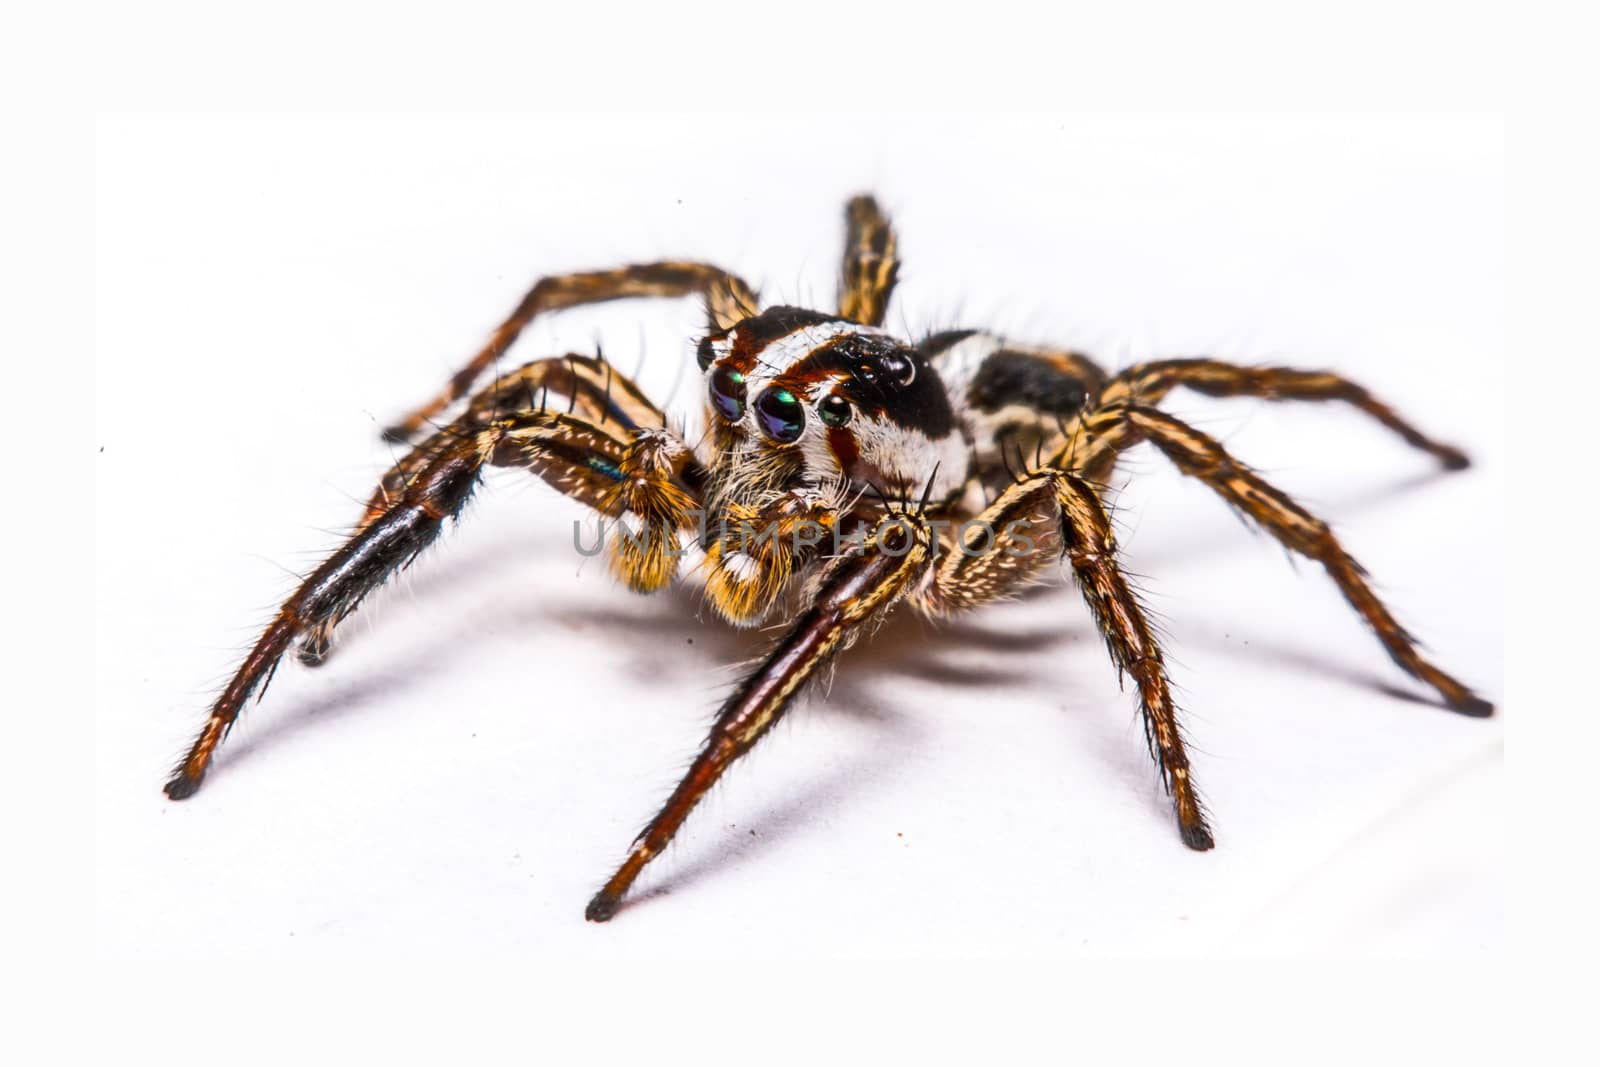 isolated of jumper spider on white background